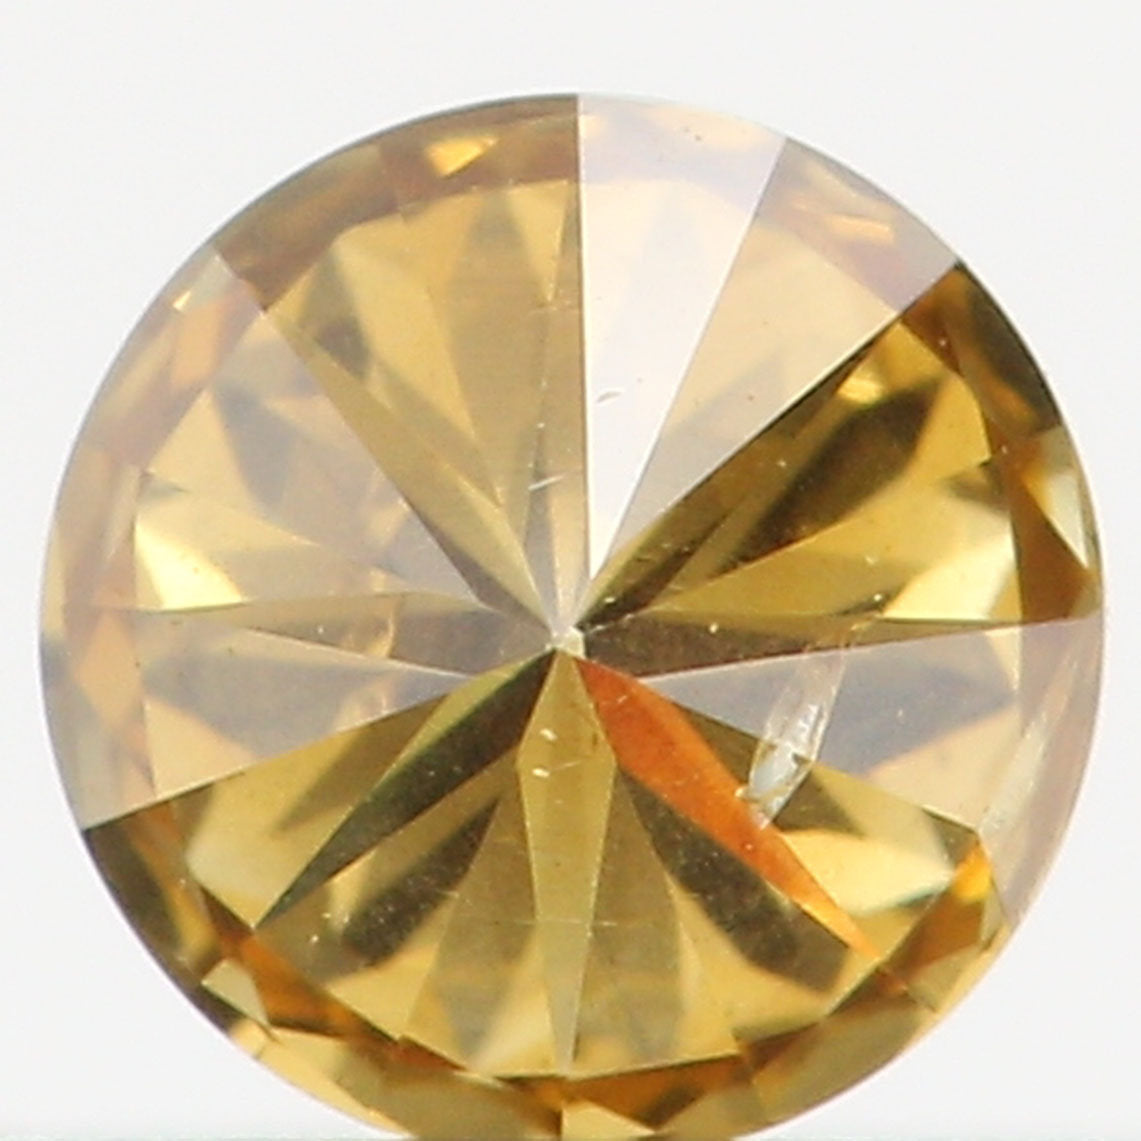 Natural Loose Diamond Round Fancy Dark Yellow Color I1 Clarity 3.20 MM 0.14 Ct L6434